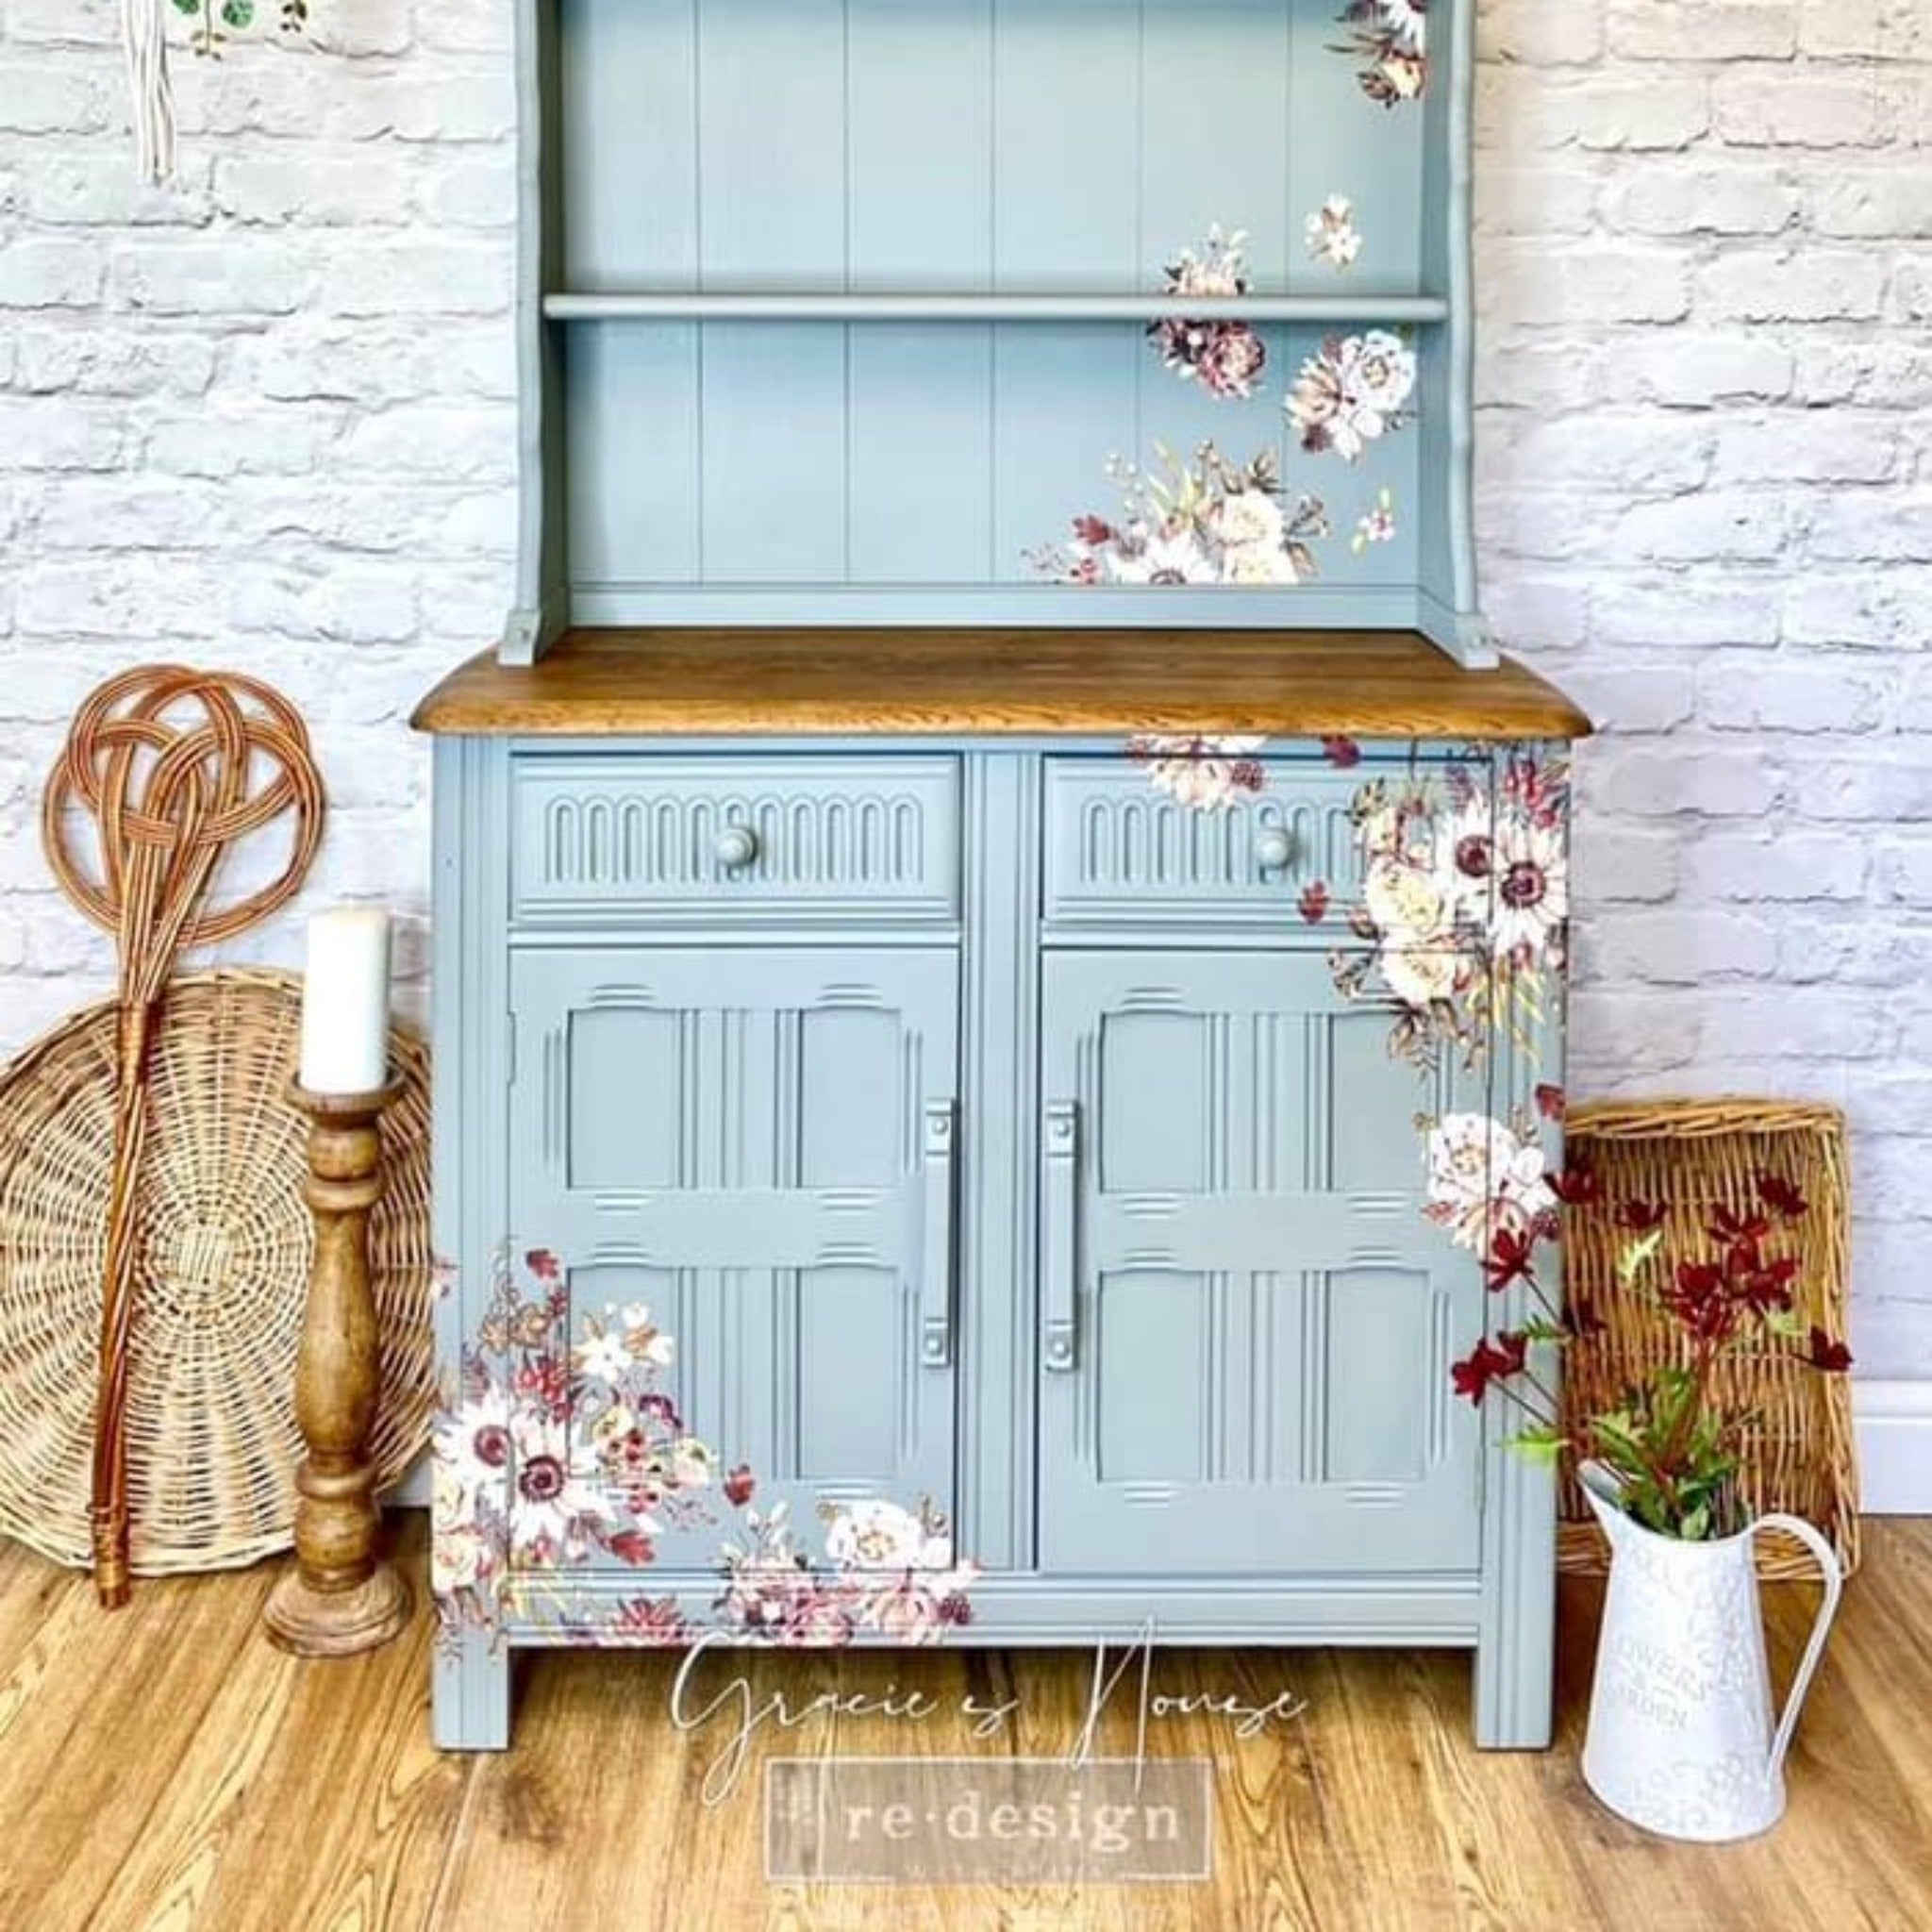 A country style hutch cabinet refurbished by Gracie's House is painted pale blue and features ReDesign with Prima's Sunflower Farms transfer on it.